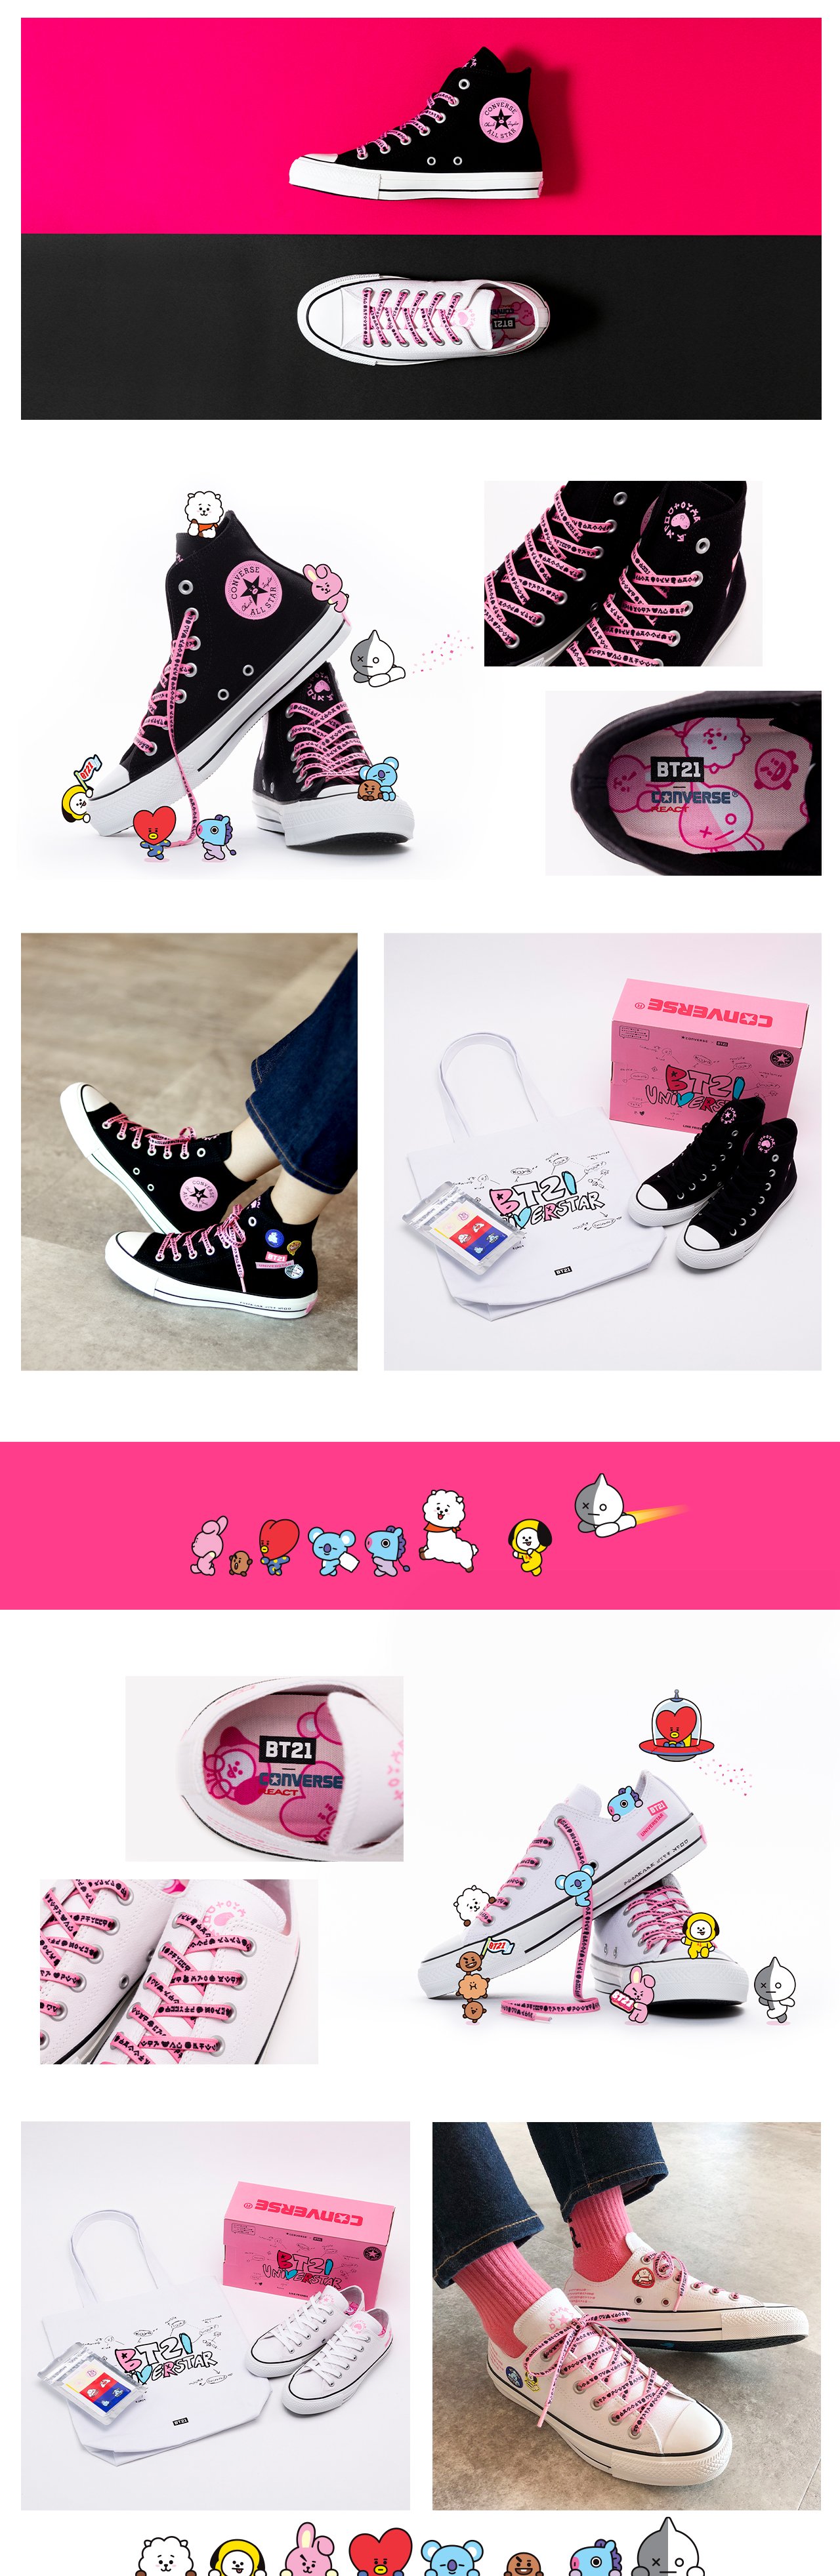 ⟭⟬ Merch⁷⟬⟭🔍⍤⃝🔎 on Twitter: "Converse x BT21 coming July 23 - Two styles - black or white - Sizes: 22.5-26.0cm (3.5-5.5, 6.5-7.5inch) - Price: 14,960 = ~$139.40 - JAPAN ONLY